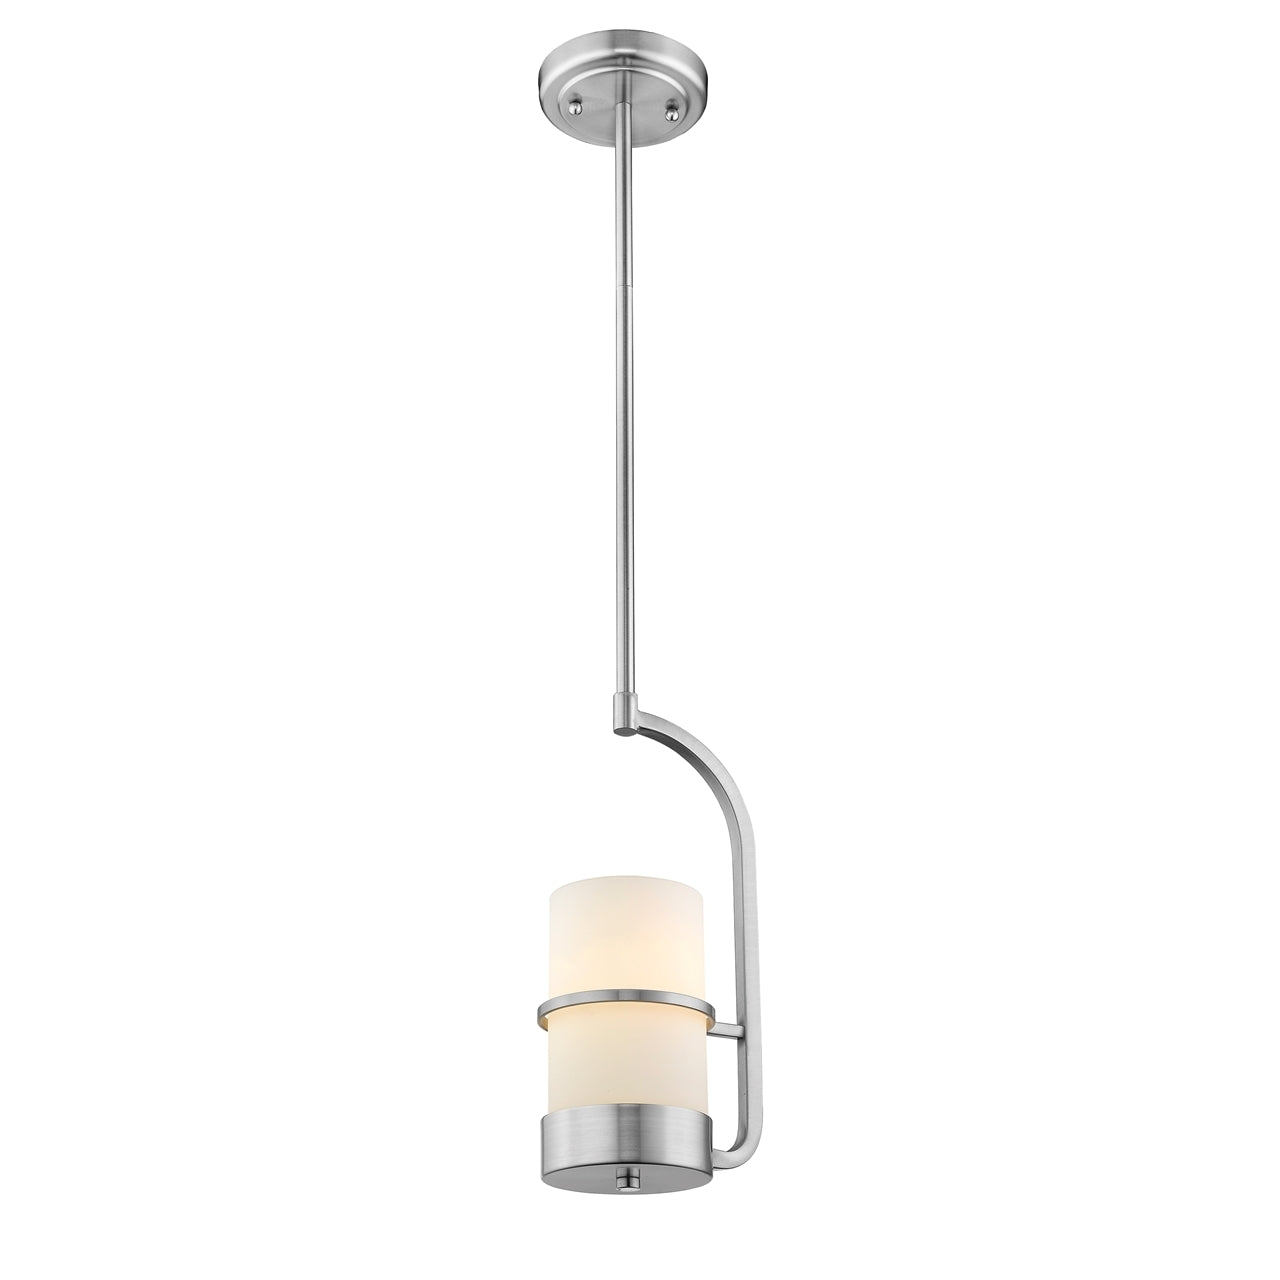 "PENELOPE" Contemporary 1 Light Brushed Nickel Ceiling Mini Pendant 7" Wide